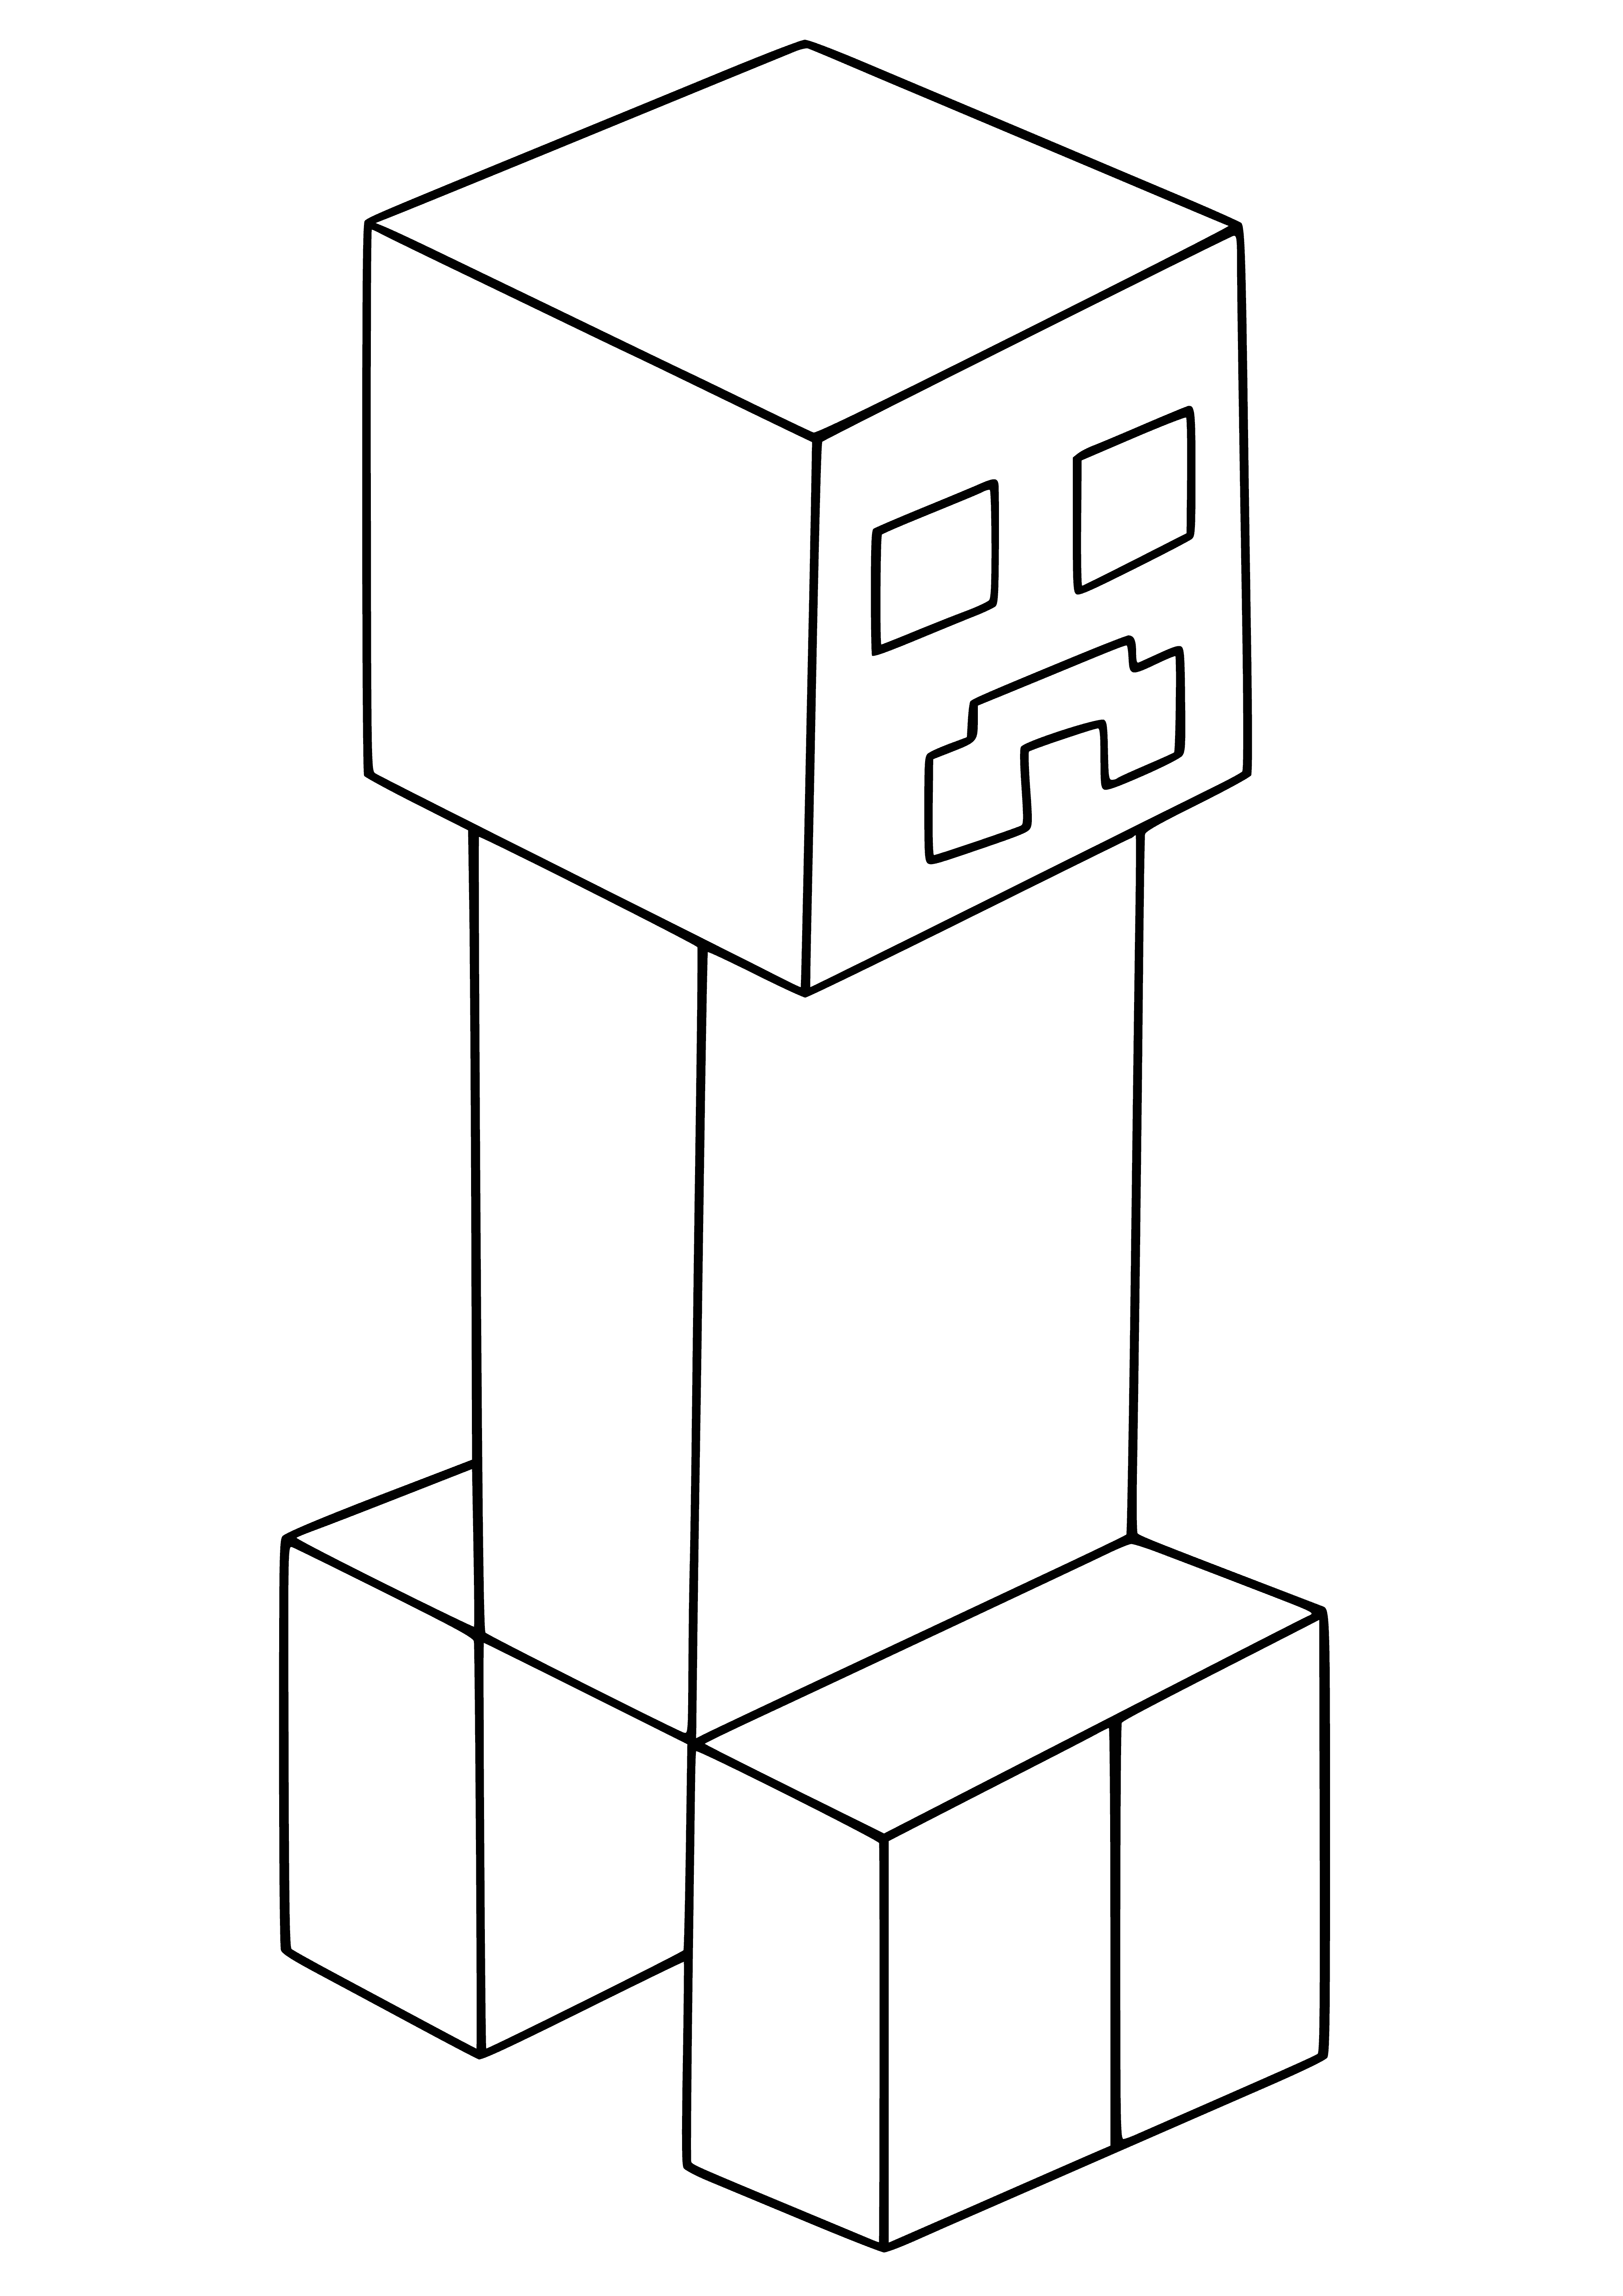 coloring page: In Minecraft, a hostile Creeper mob w/green body & square head will explode when near a player.